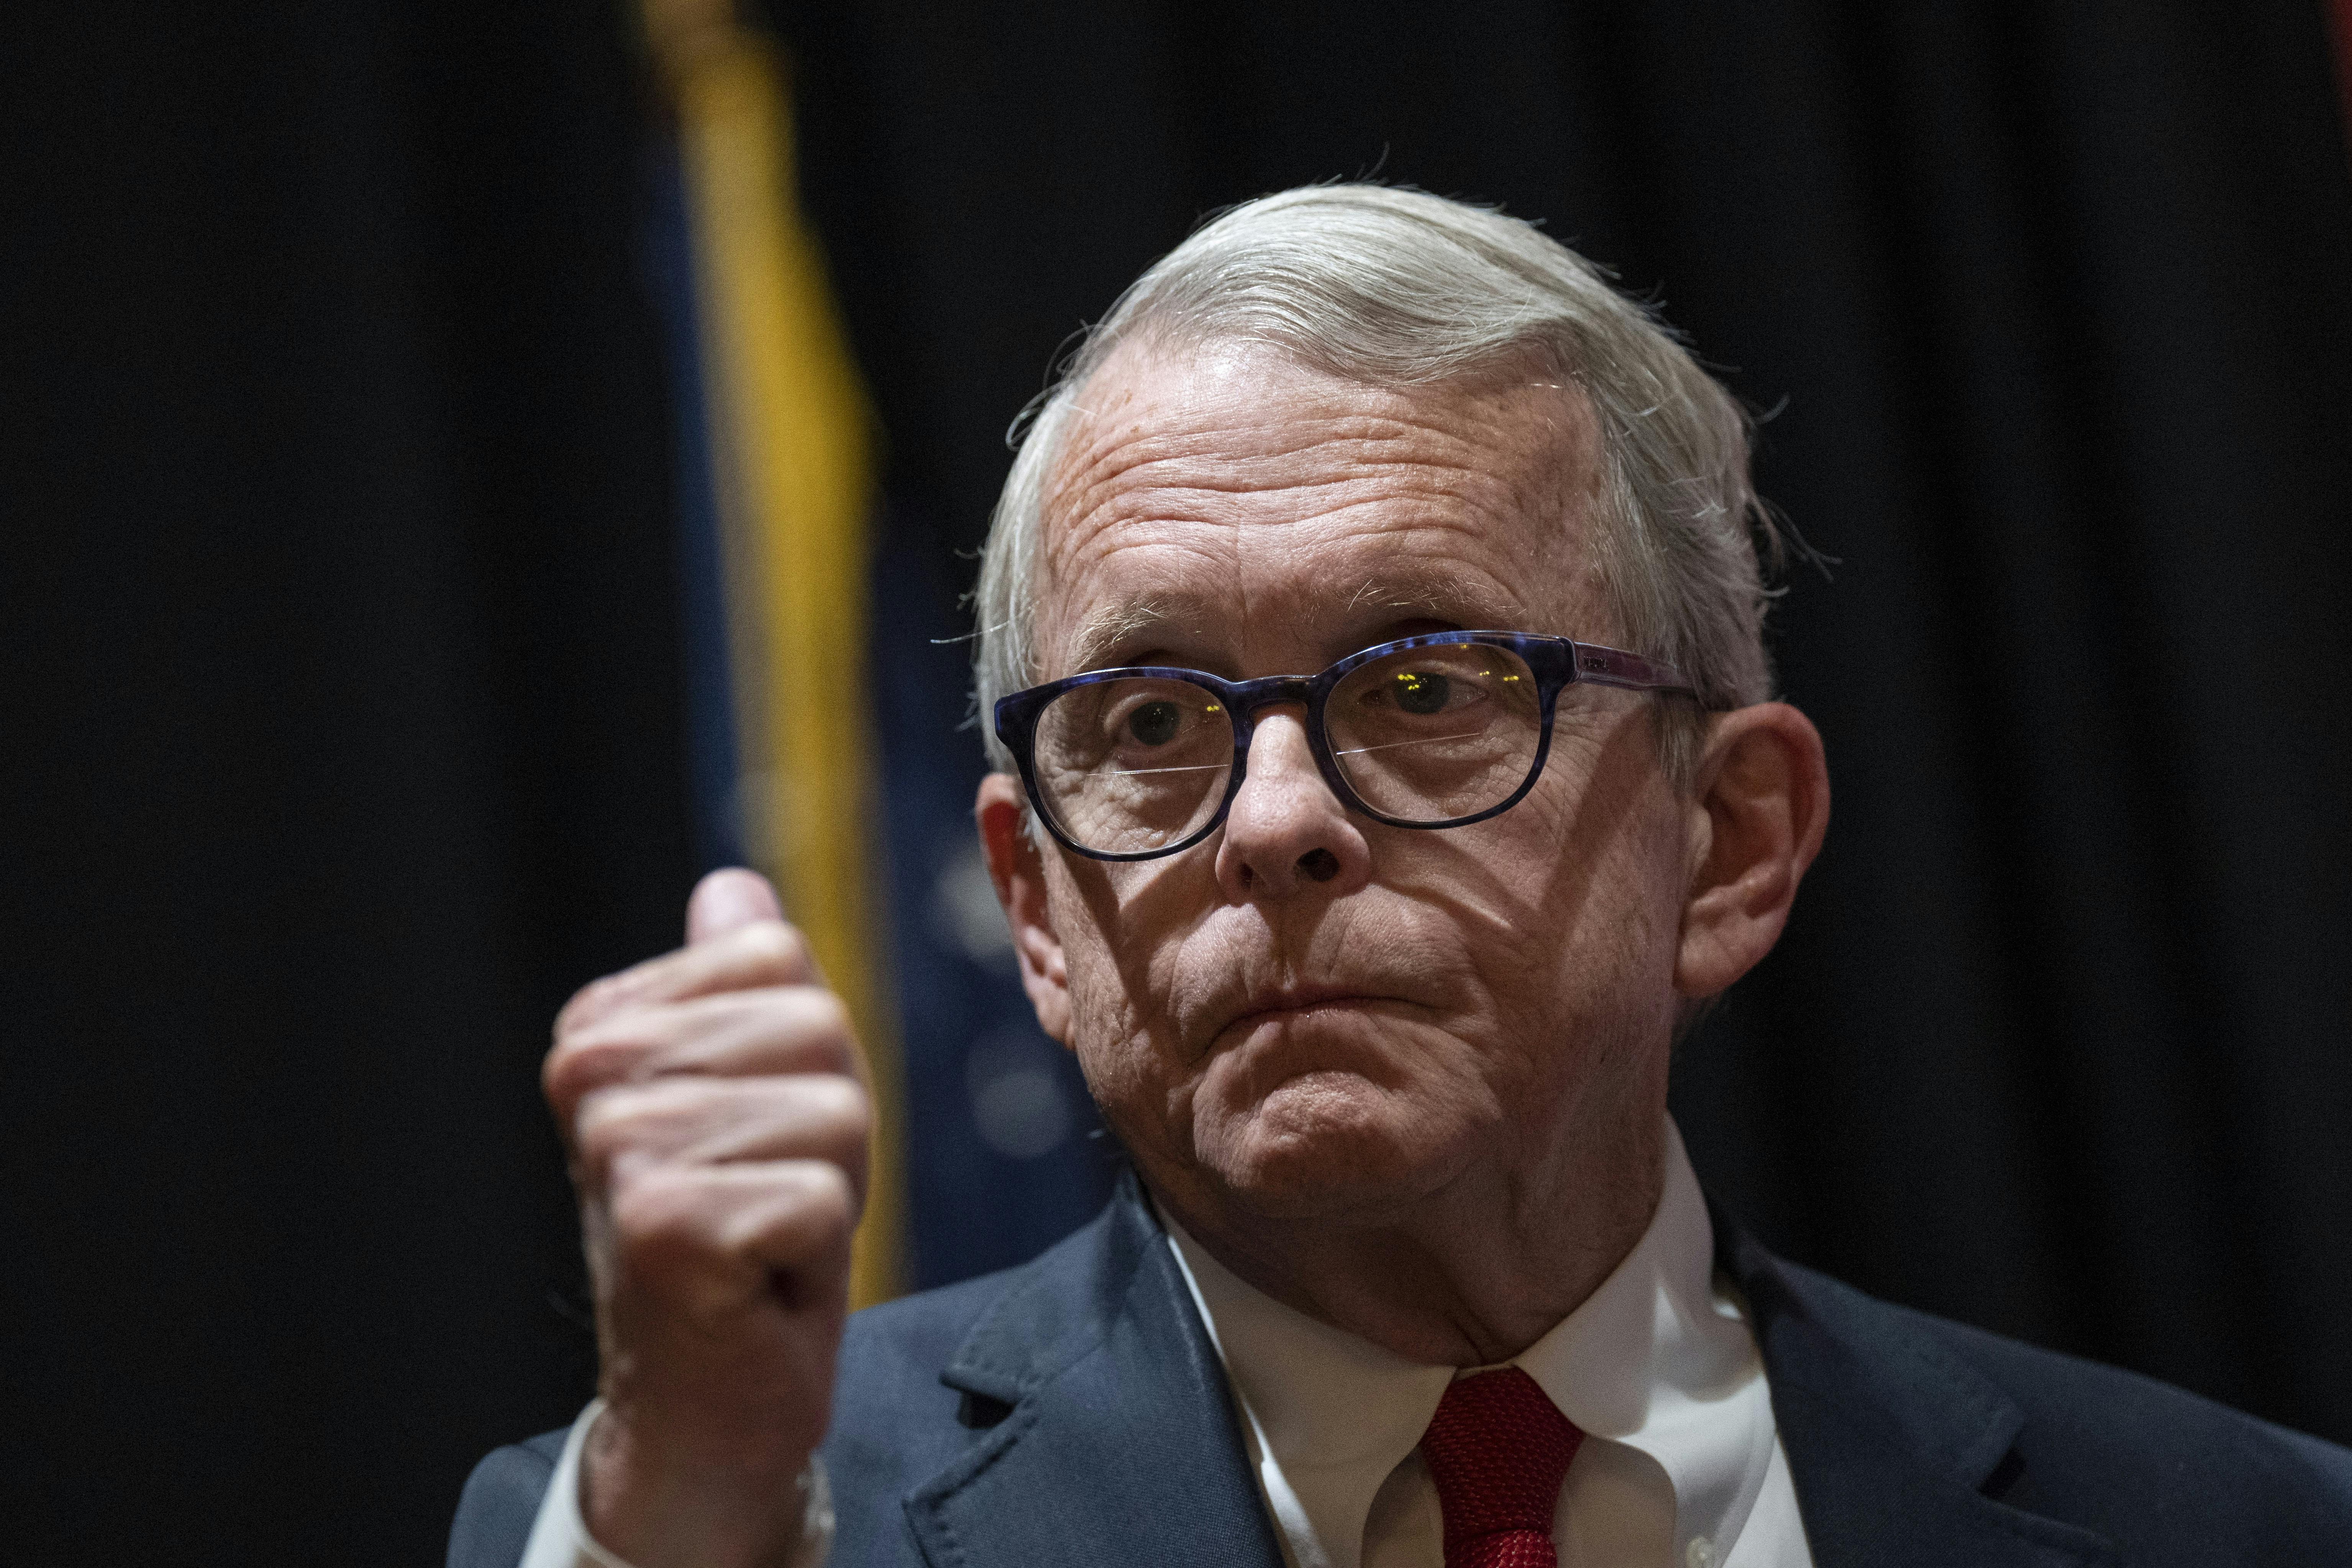 Forced Sex In The Train - After Train Derailment, Ohio Governor Mike Dewine Says â€œI'm Not Seeingâ€ Any  Problems | The New Republic